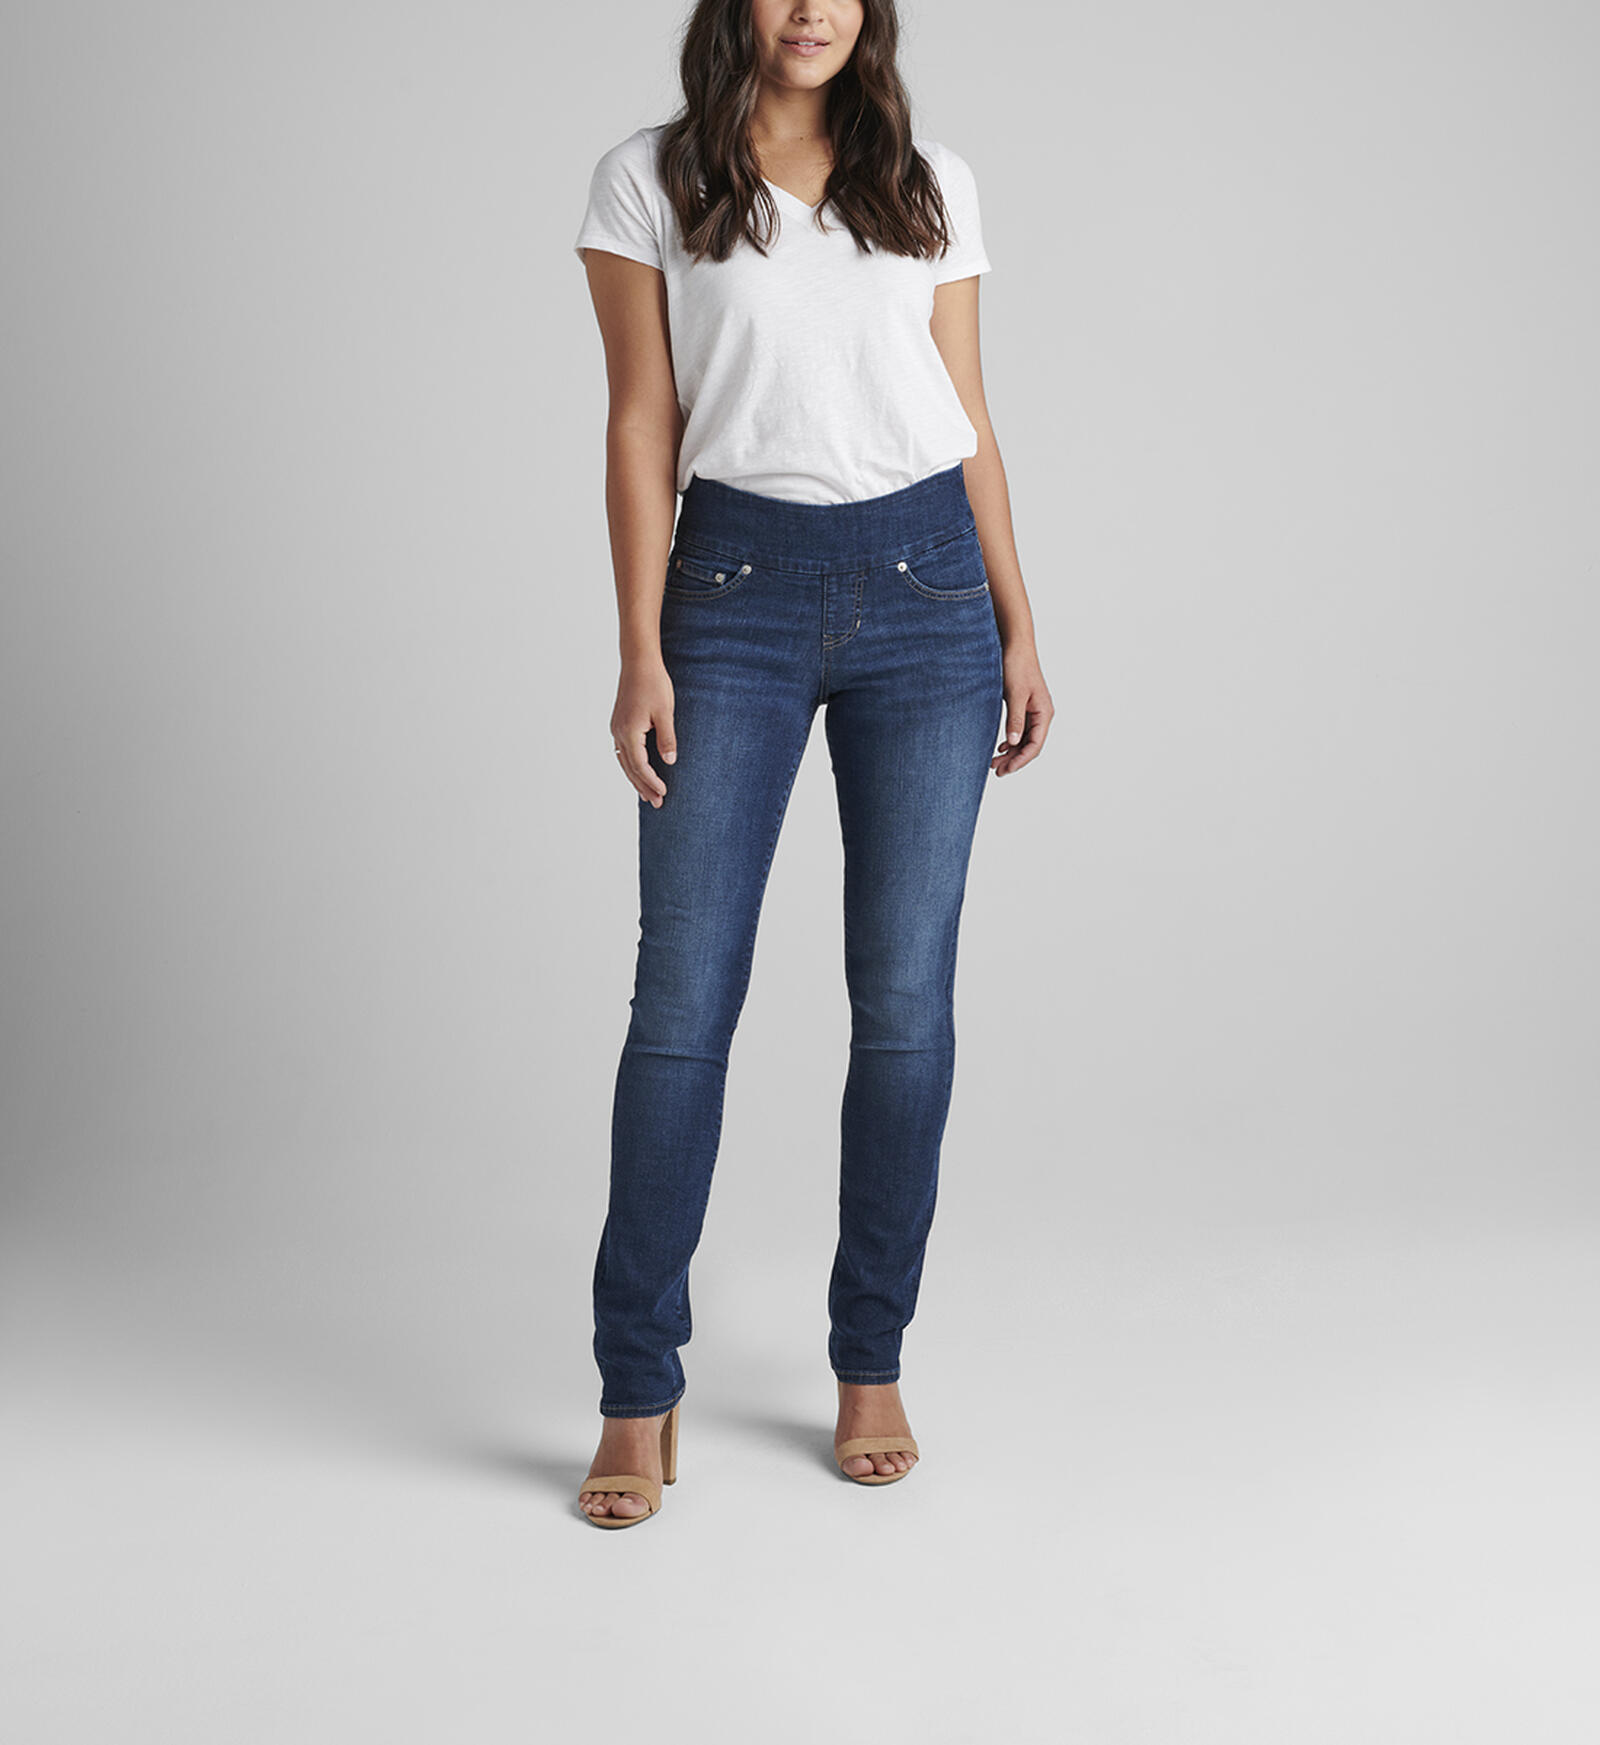 Buy Peri Mid Rise Straight Leg Pull-On Jeans Petite for CAD 78.00